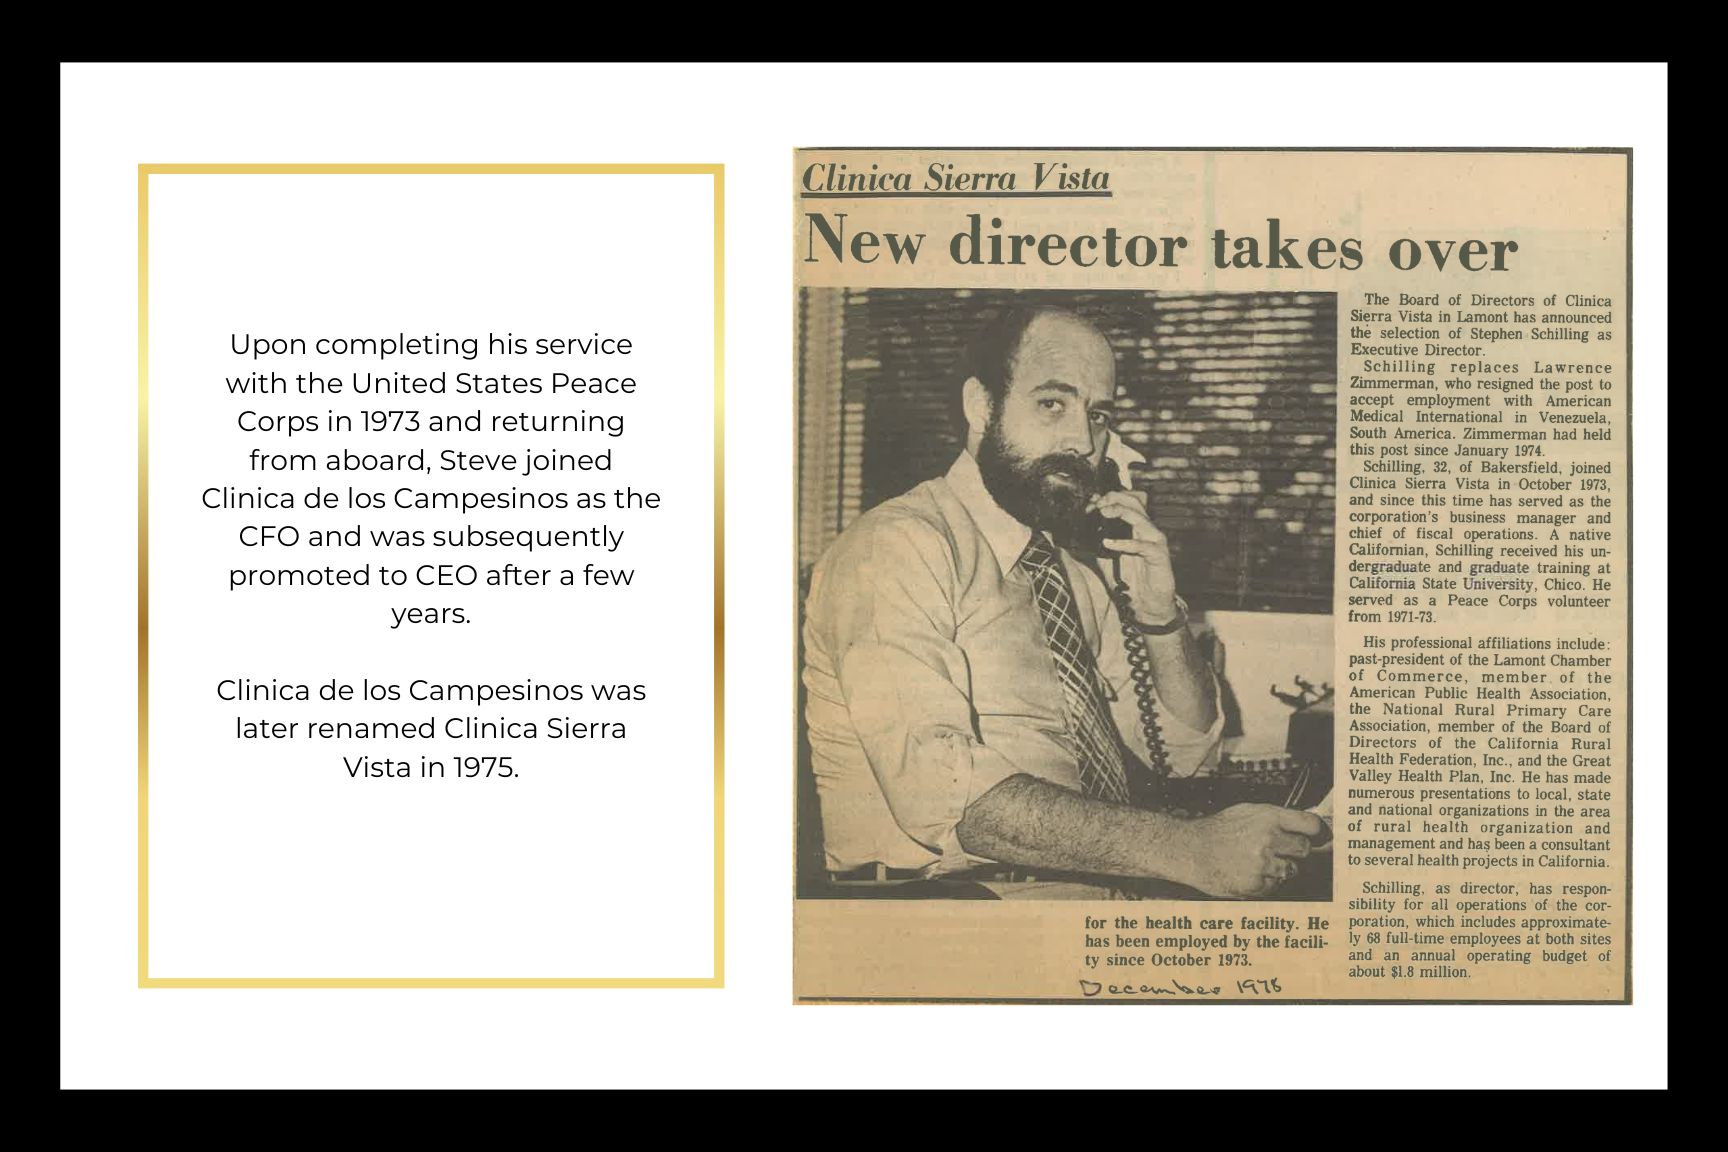 Upon completing his service with the United States Peace Corps in 1973 and returning from aboard, Steve joined Clinica de los Campesinos as the CFO and was subsequently promoted to CEO after a few years.  Clinica De Los Campesinos was later renamed Clinica Sierra Vista in 1975.